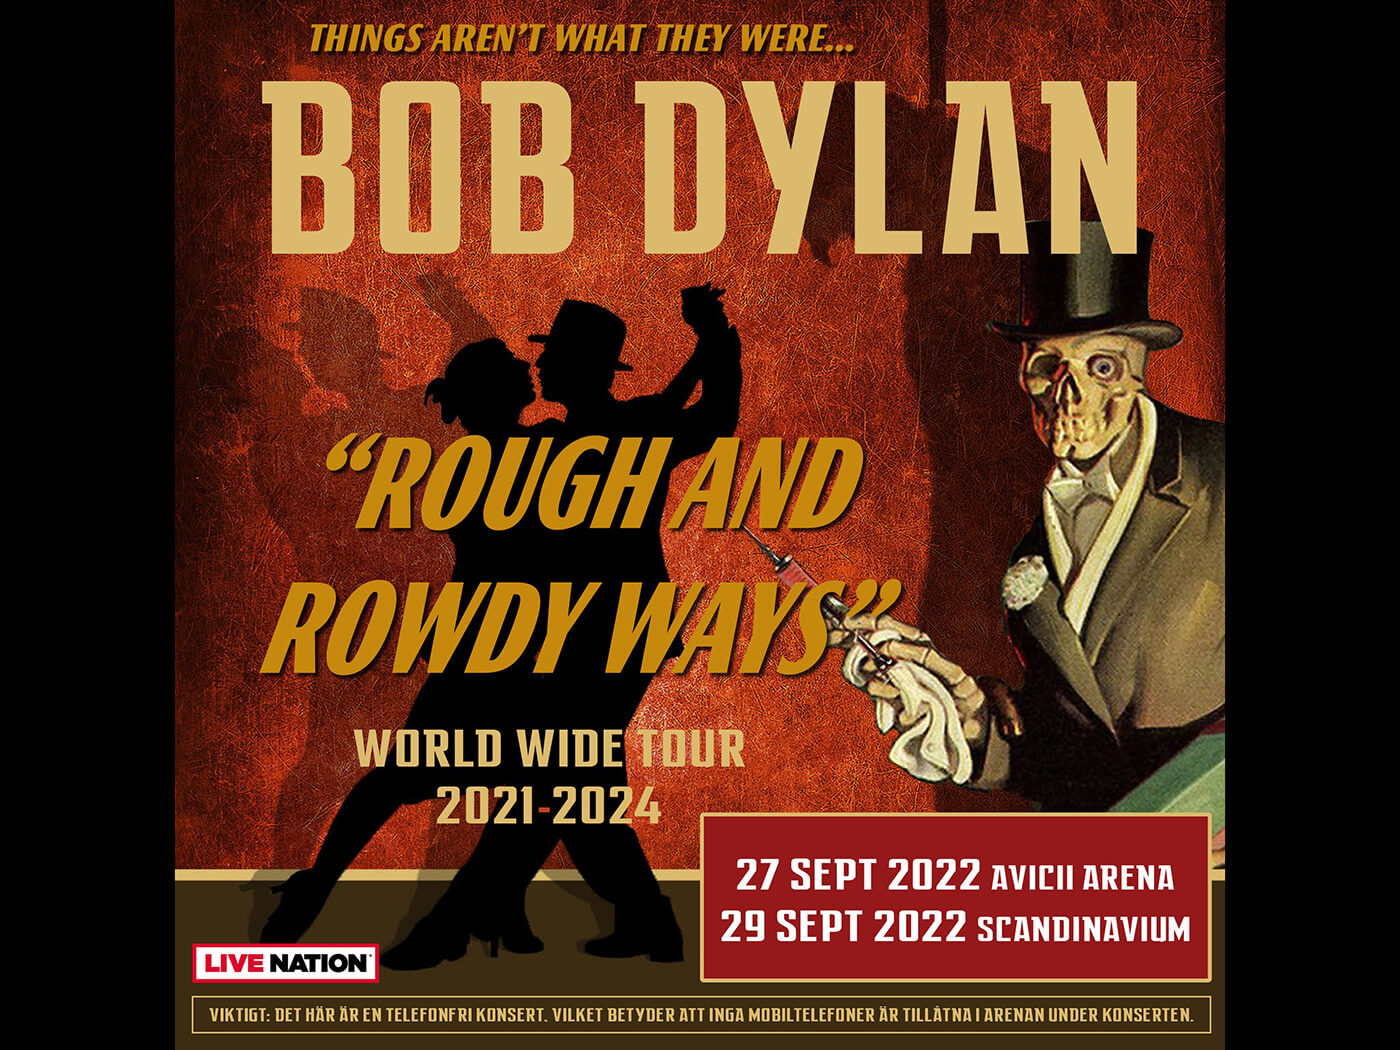 Bob Dylan’s Rough And Rowdy Ways Tour continues! Show 2: Stockholm